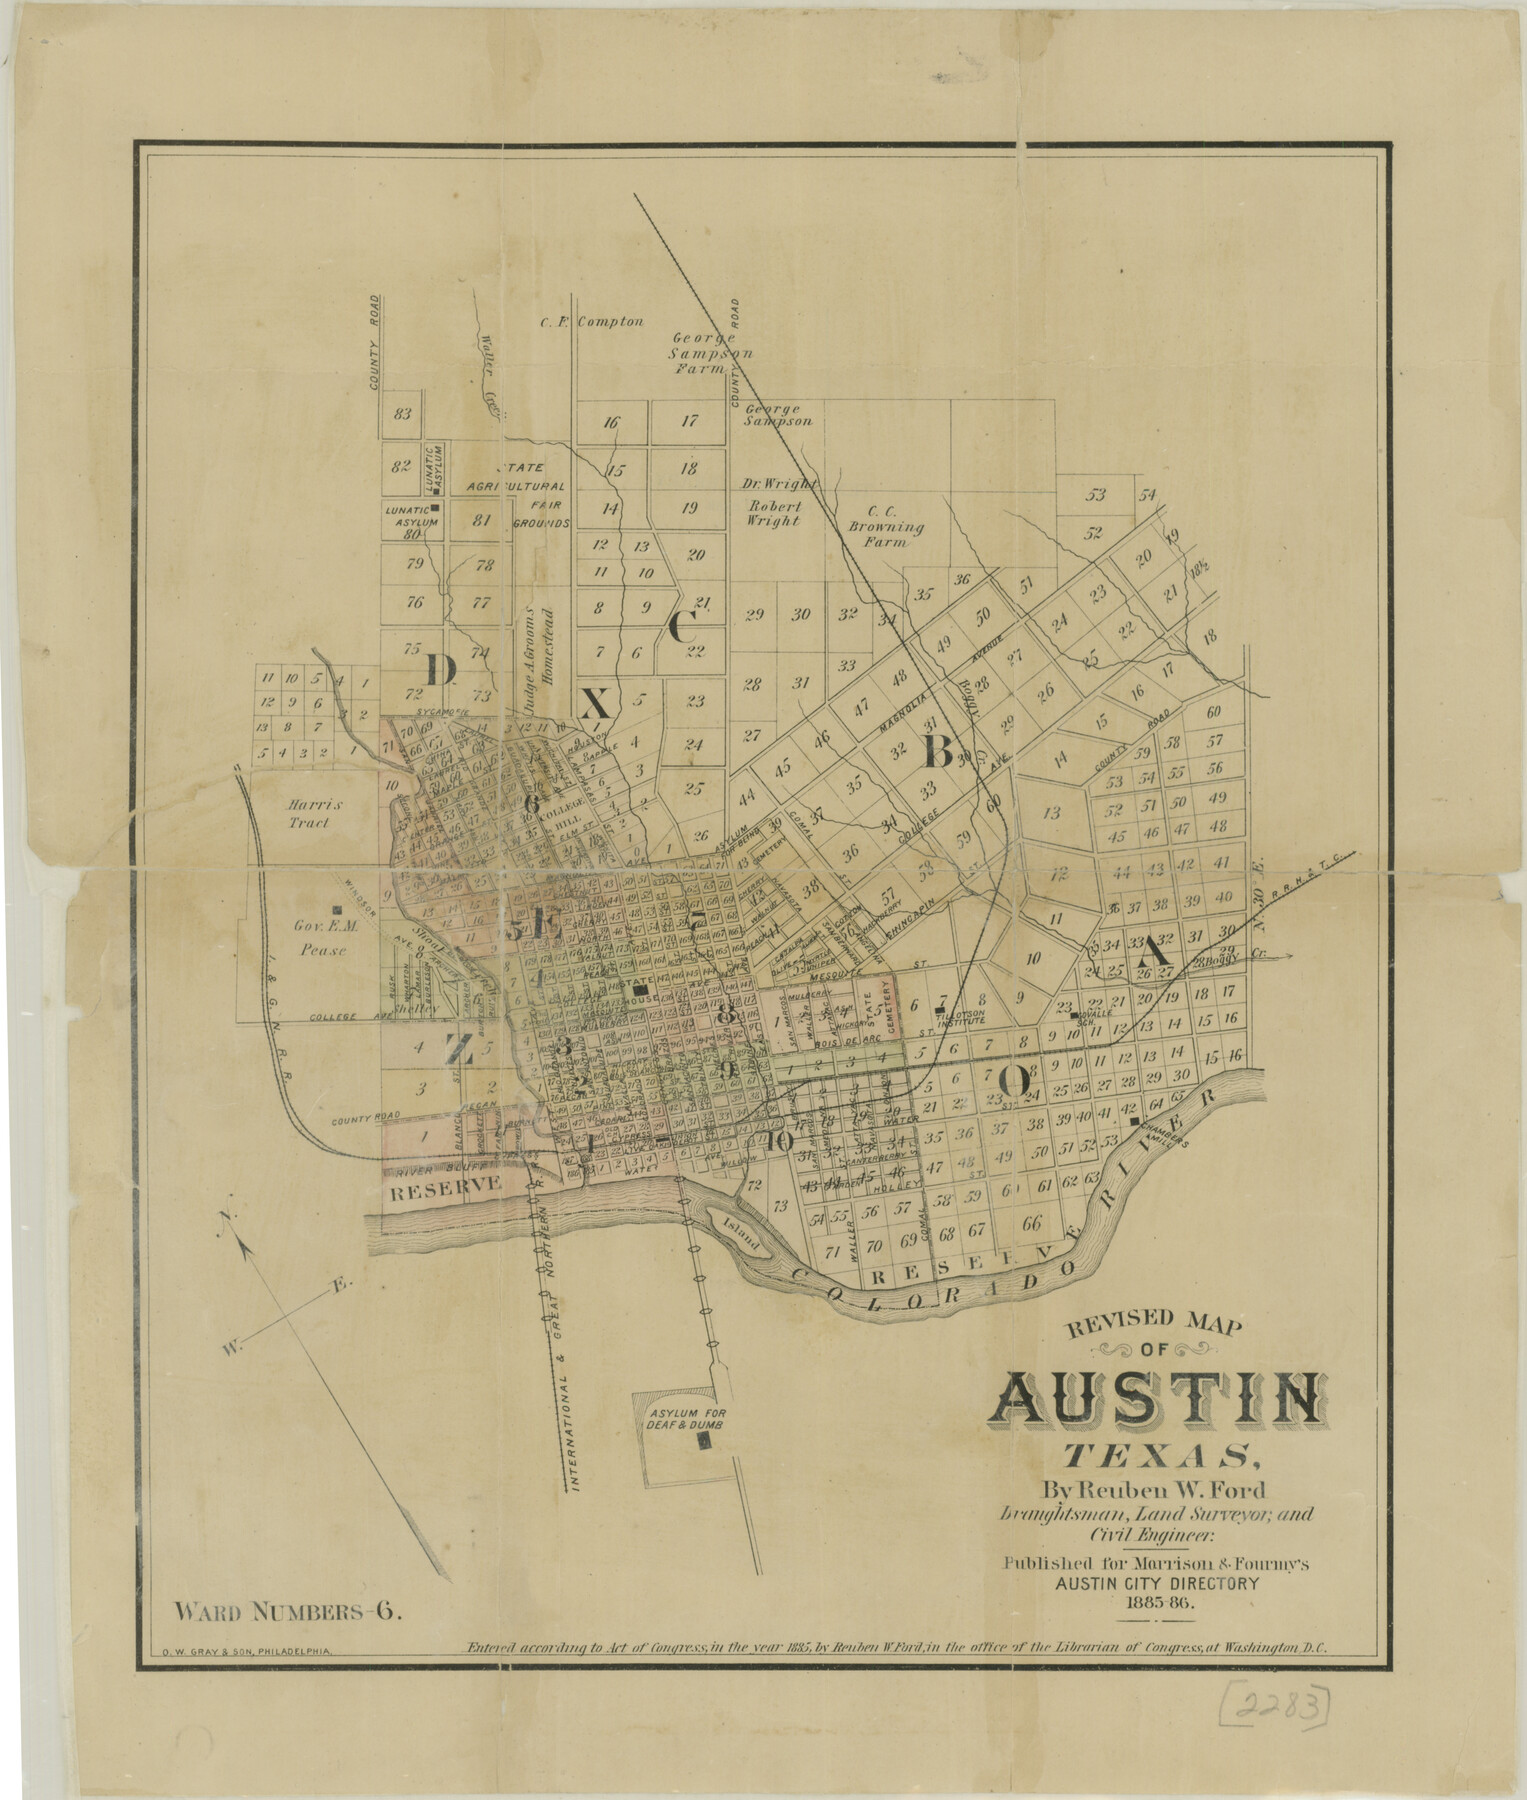 76272, Revised Map of Austin, Texas, Texas State Library and Archives